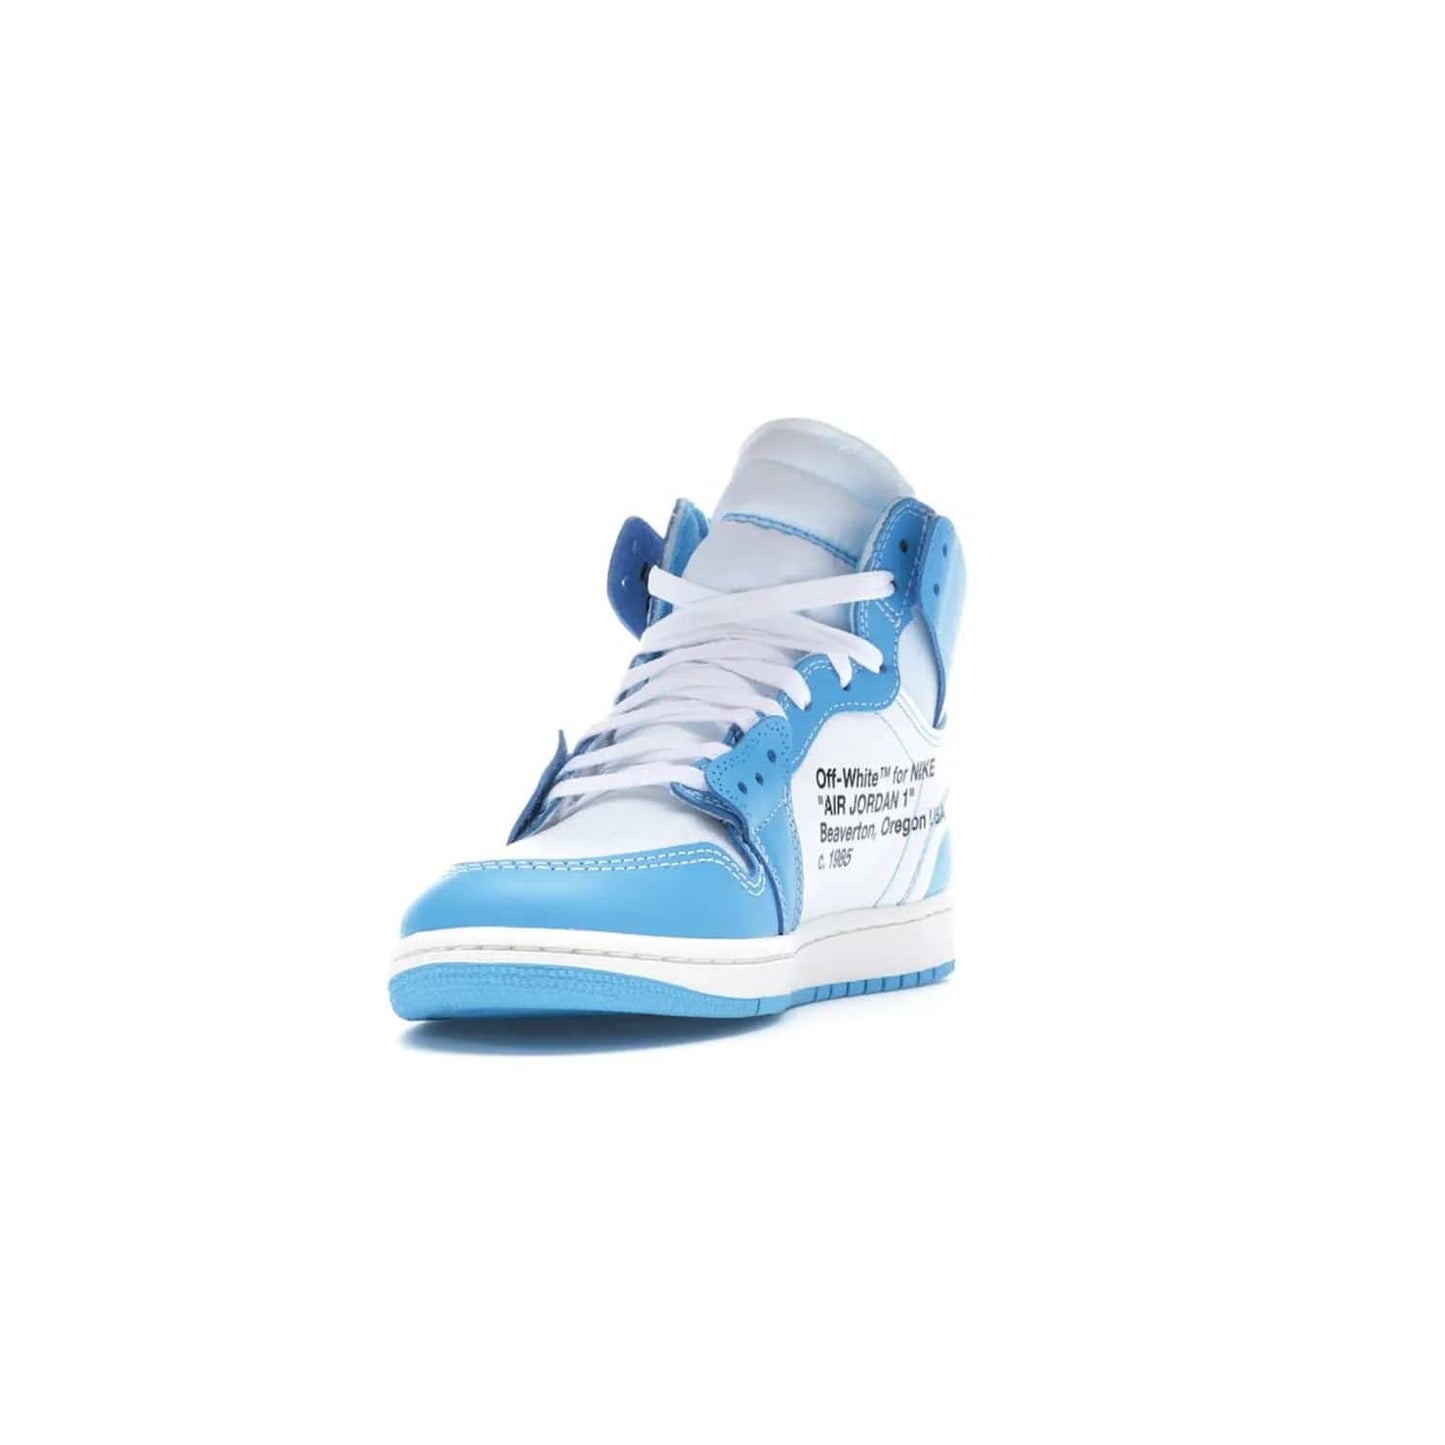 Jordan 1 Retro High Off-White University Blue - Image 13 - Only at www.BallersClubKickz.com - Classic Jordan 1 Retro High "Off-White UNC" sneakers meld style and comfort. Boasting deconstructed white and blue leather, Off-White detailing, and a white, dark powder blue and cone colorway, these sneakers are perfect for dressing up or down. Get the iconic Off-White Jordan 1's and upgrade your look.